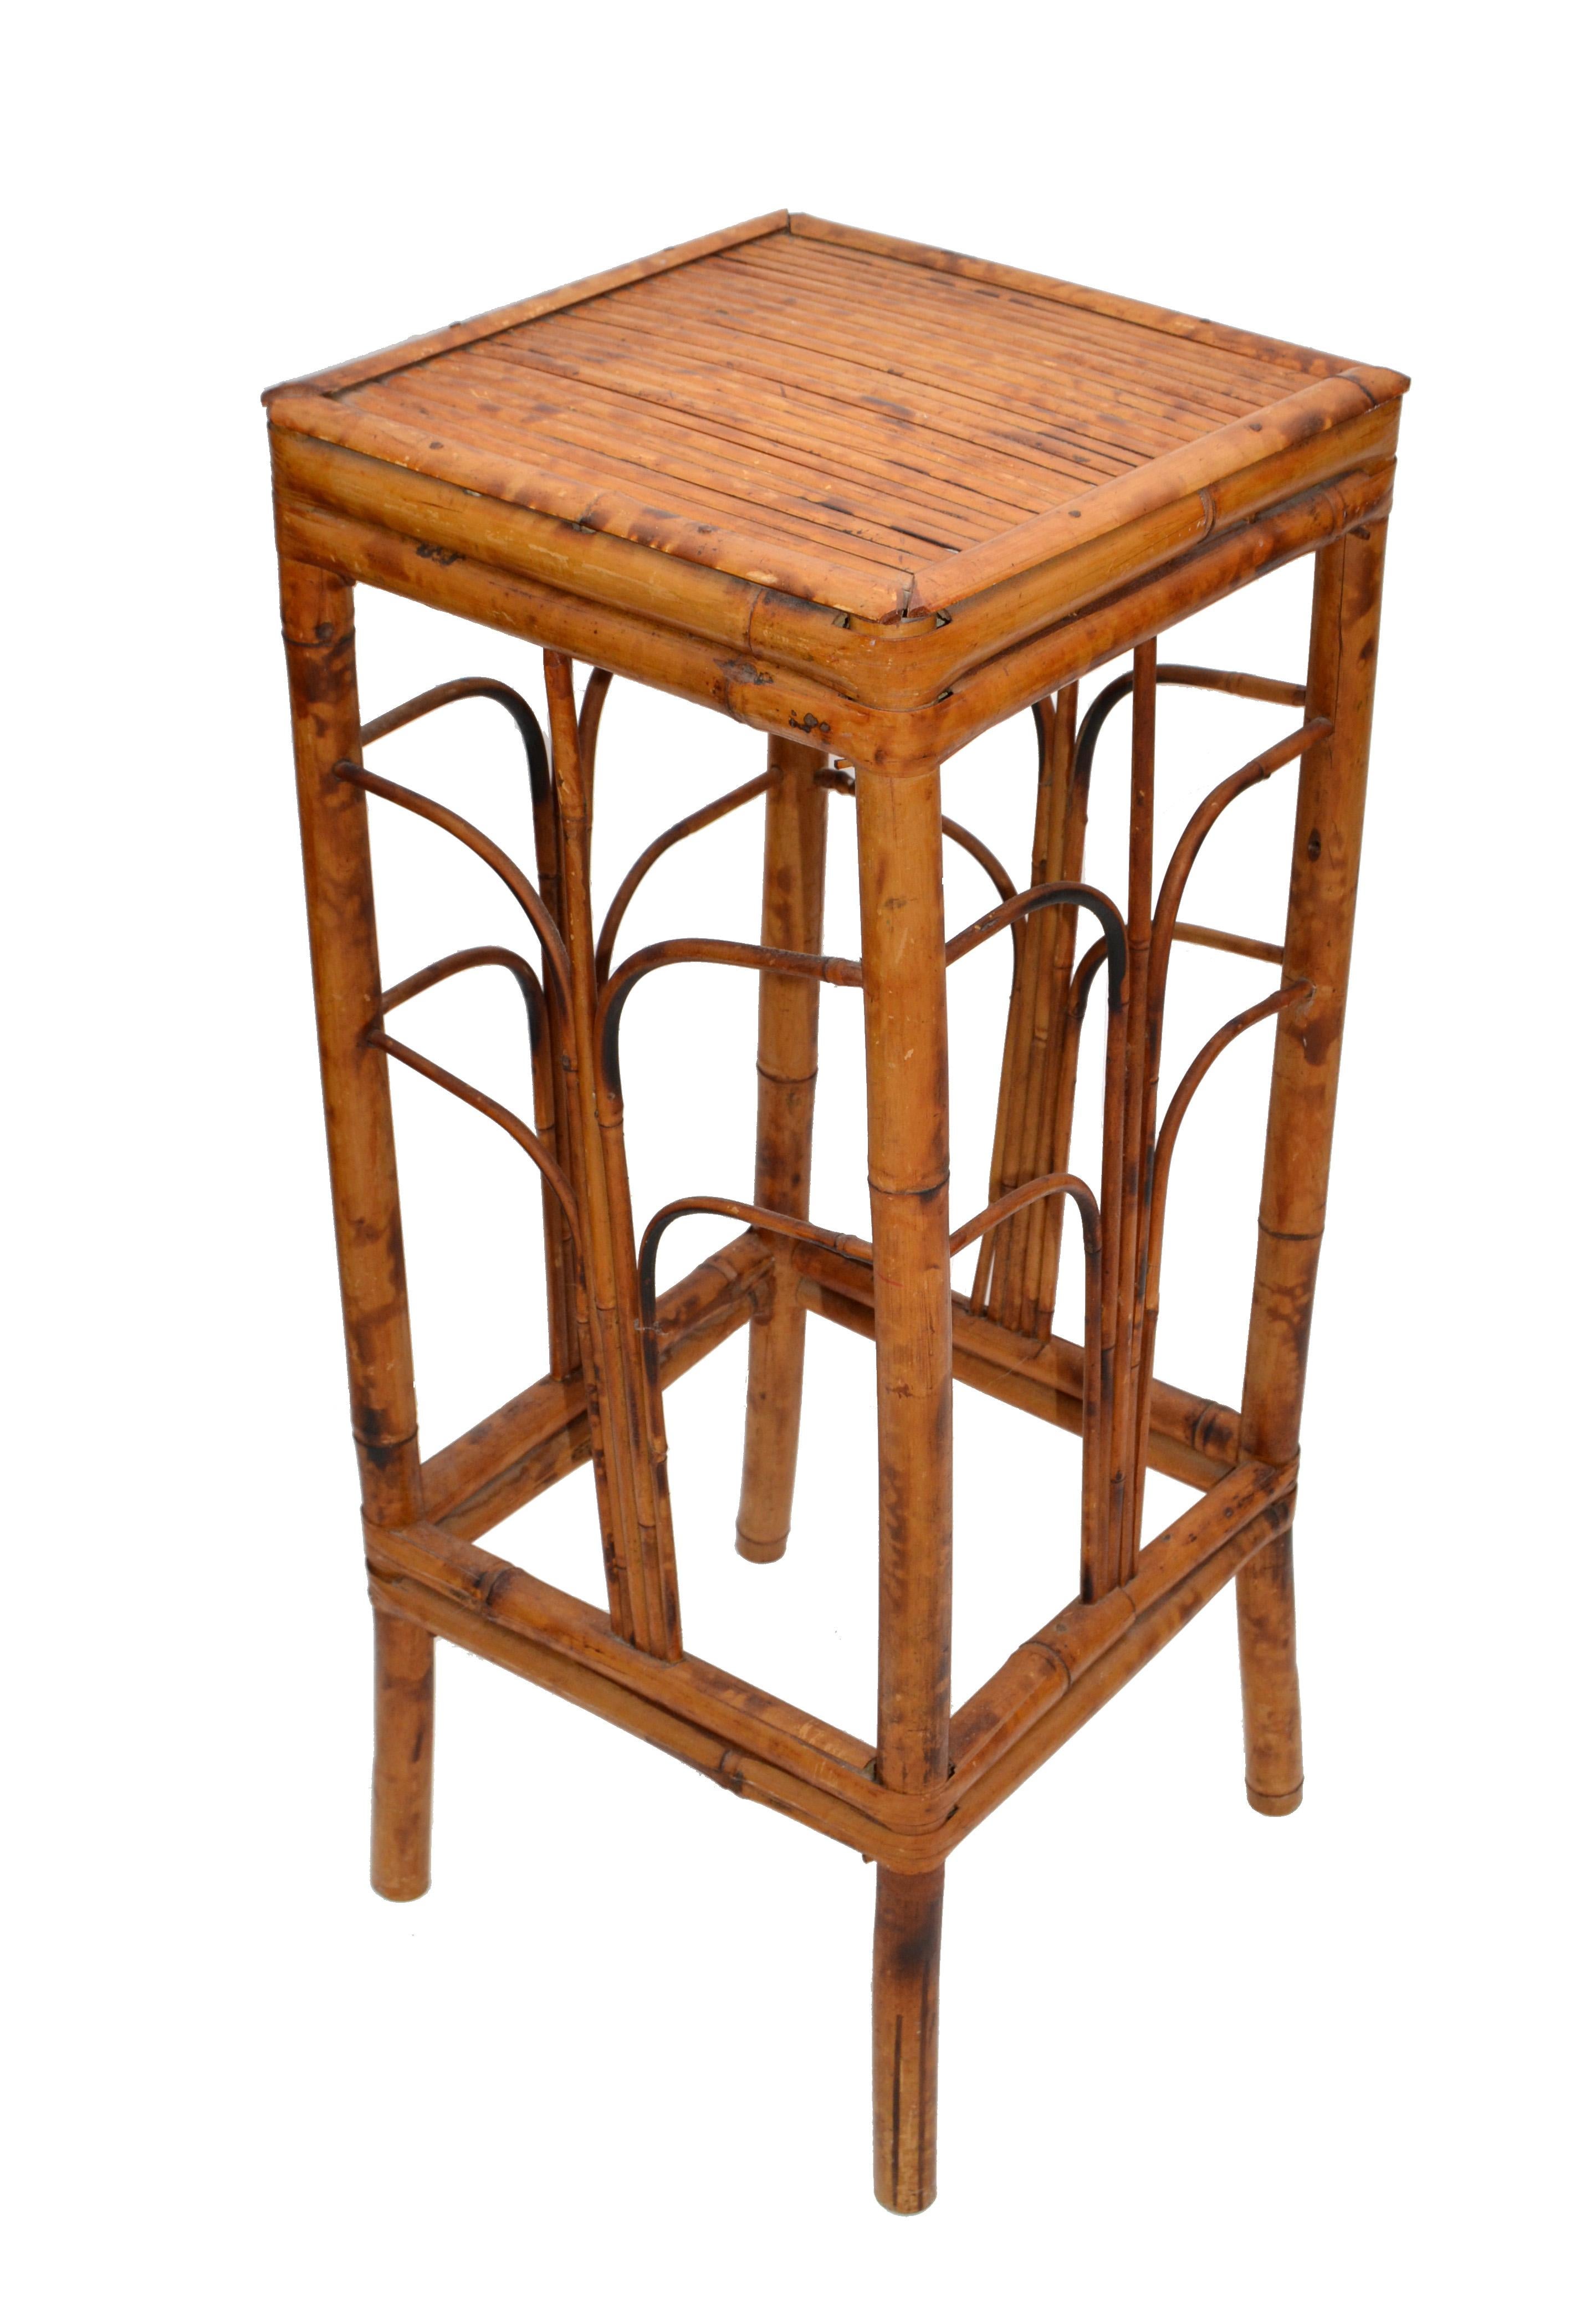 Bohemian Boho Chic Handcrafted Mid-Century Modern Bamboo & Rattan Side Table, Plant Stand